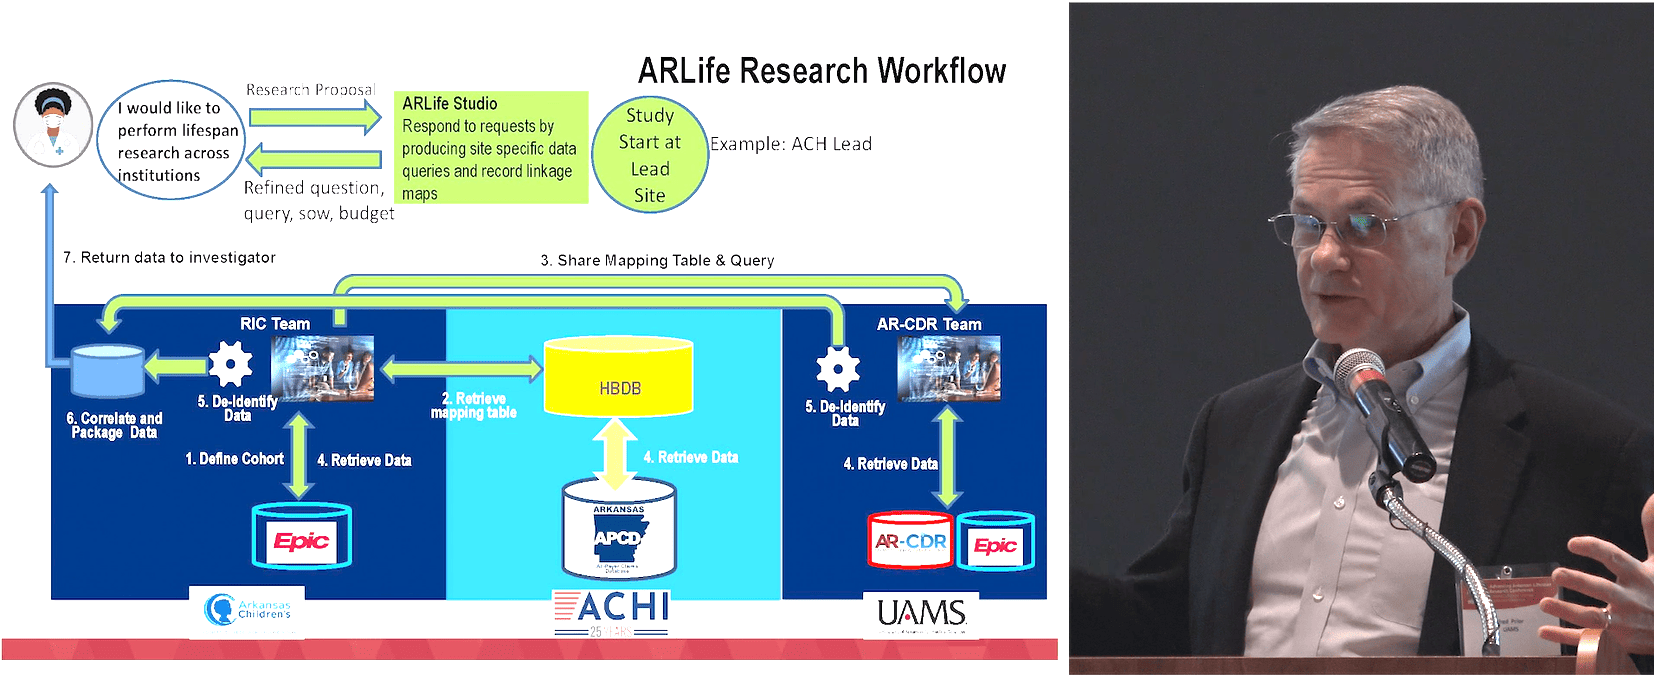 Fred Prior, Ph.D., introduced ARLife during his keynote presentation. 